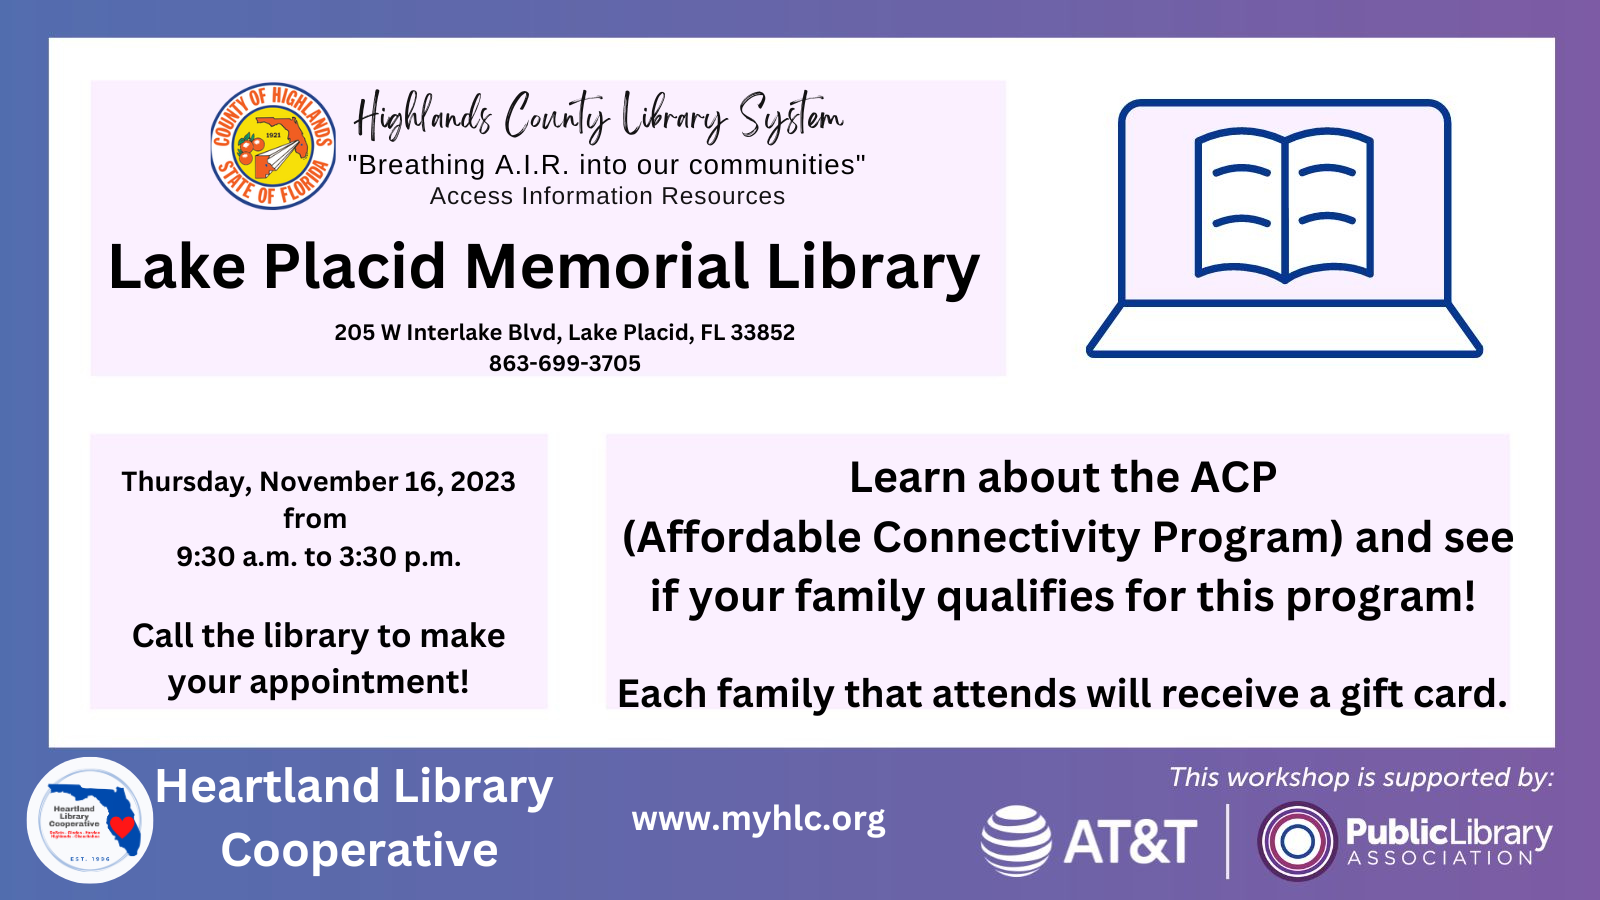 If you would like assistance in applying for the ACP or Affordable Connectivity Program, schedule an appointment with the Lake Placid Memorial Library on Thursday, November 16, 2023 between 9:30 a.m. and 3:30 p.m. by calling 863-699-3705 or filling out the form in this link (click here). More information about the ACP below. 